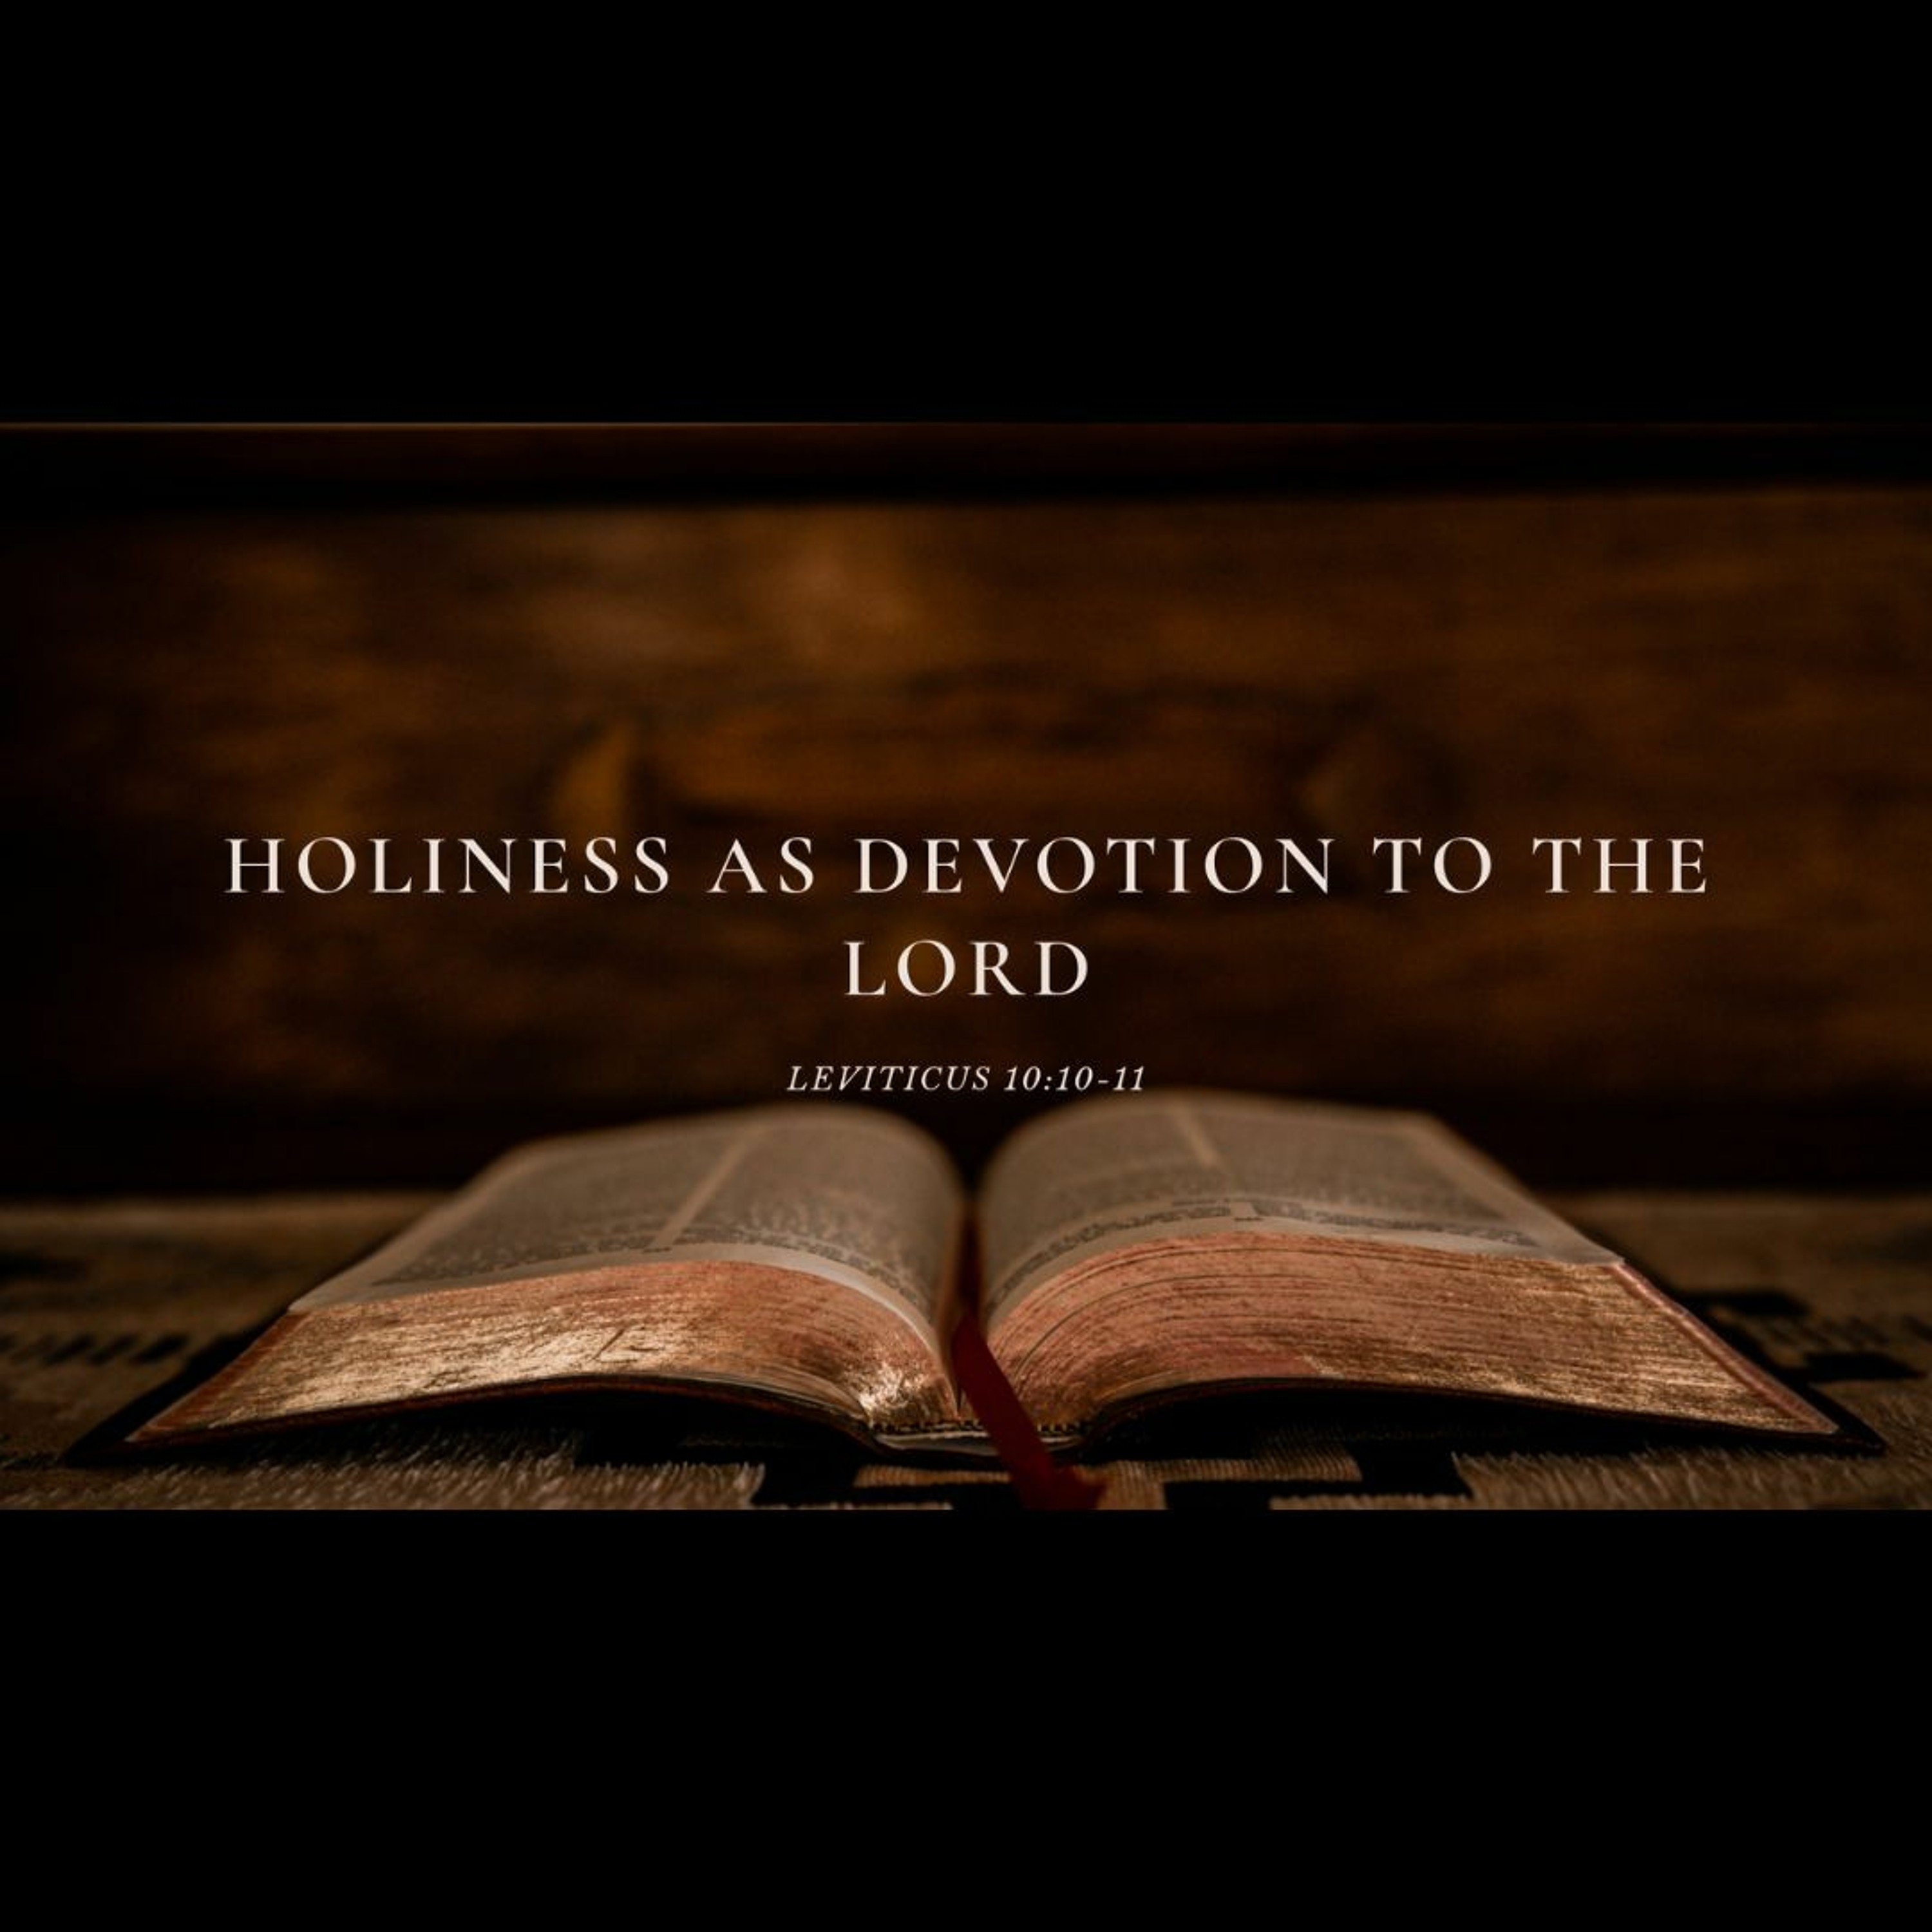 Holiness as Devotion to the Lord (Leviticus 10:10-11)